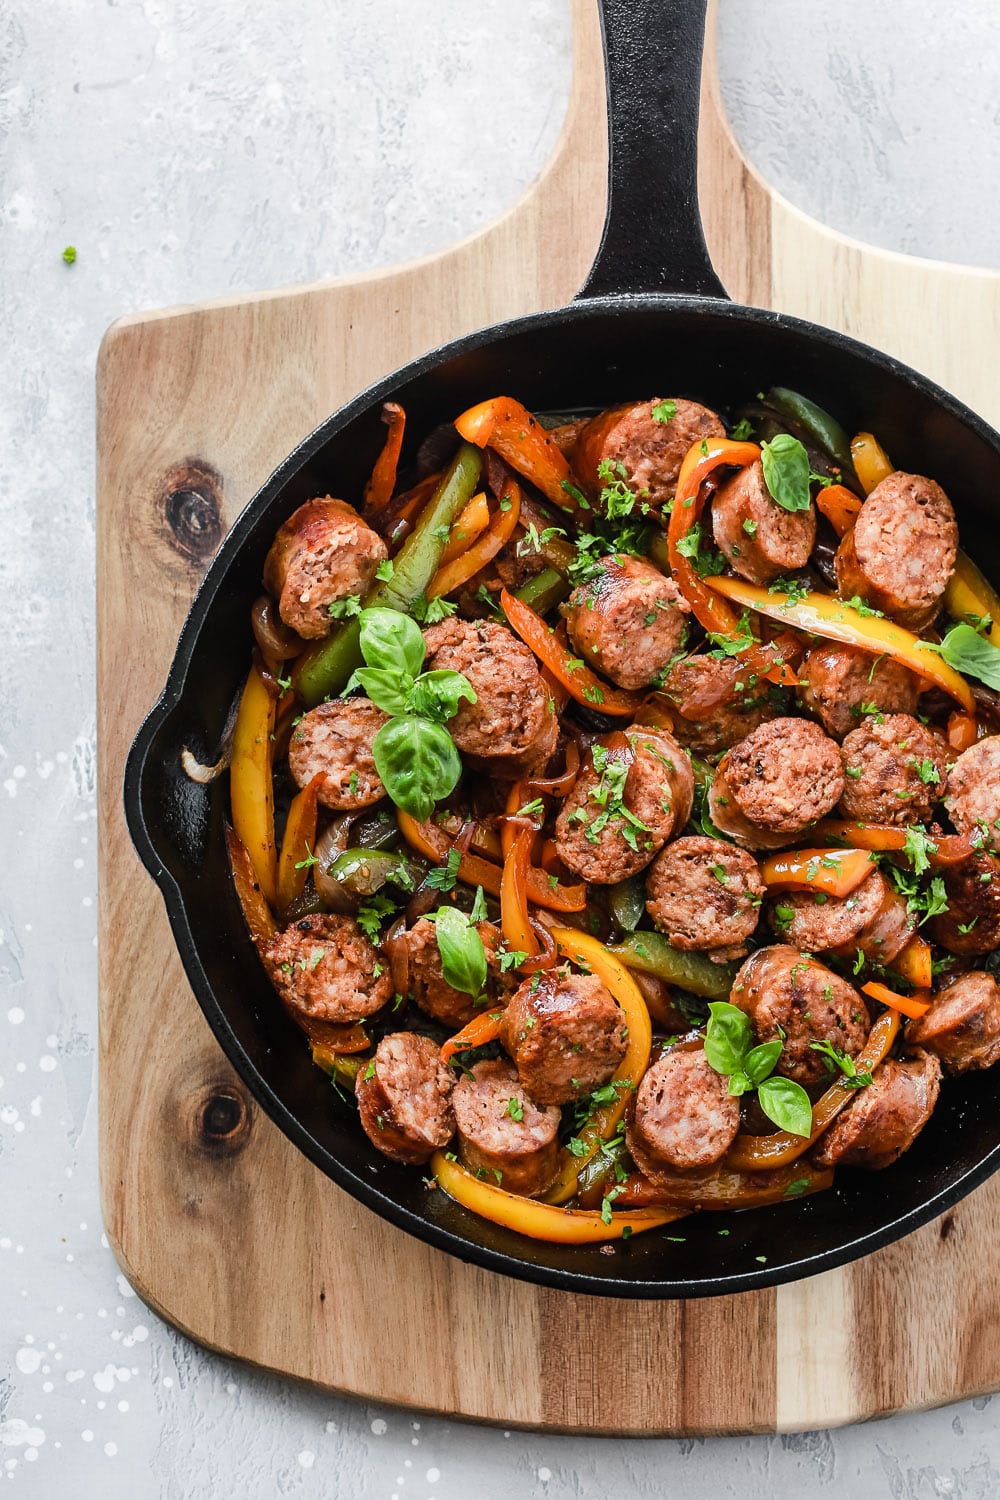 Healthy Cast Iron Skillet - Italian Sausage, Onions and Peppers Skillet.